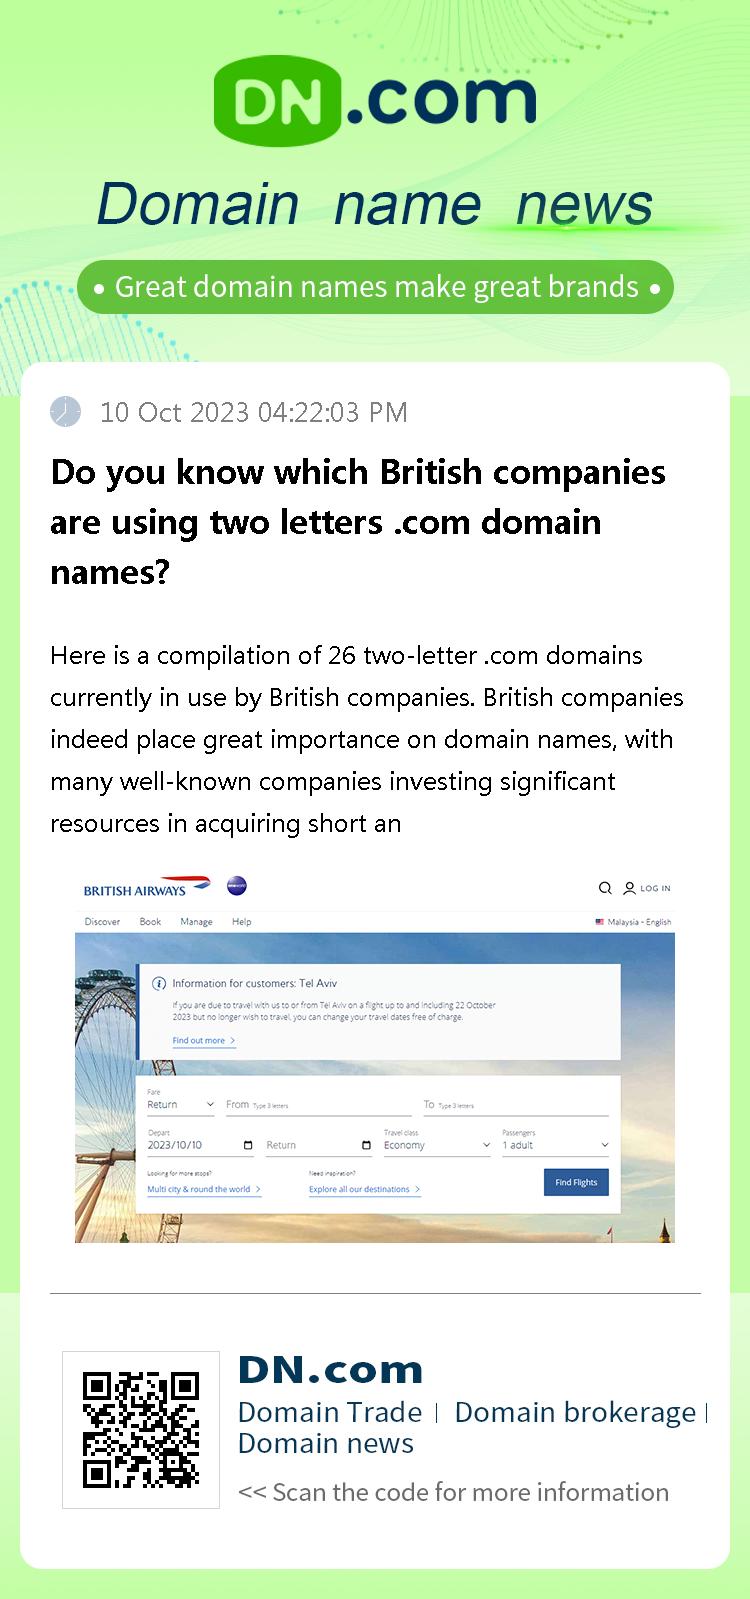 Do you know which British companies are using two letters .com domain names?